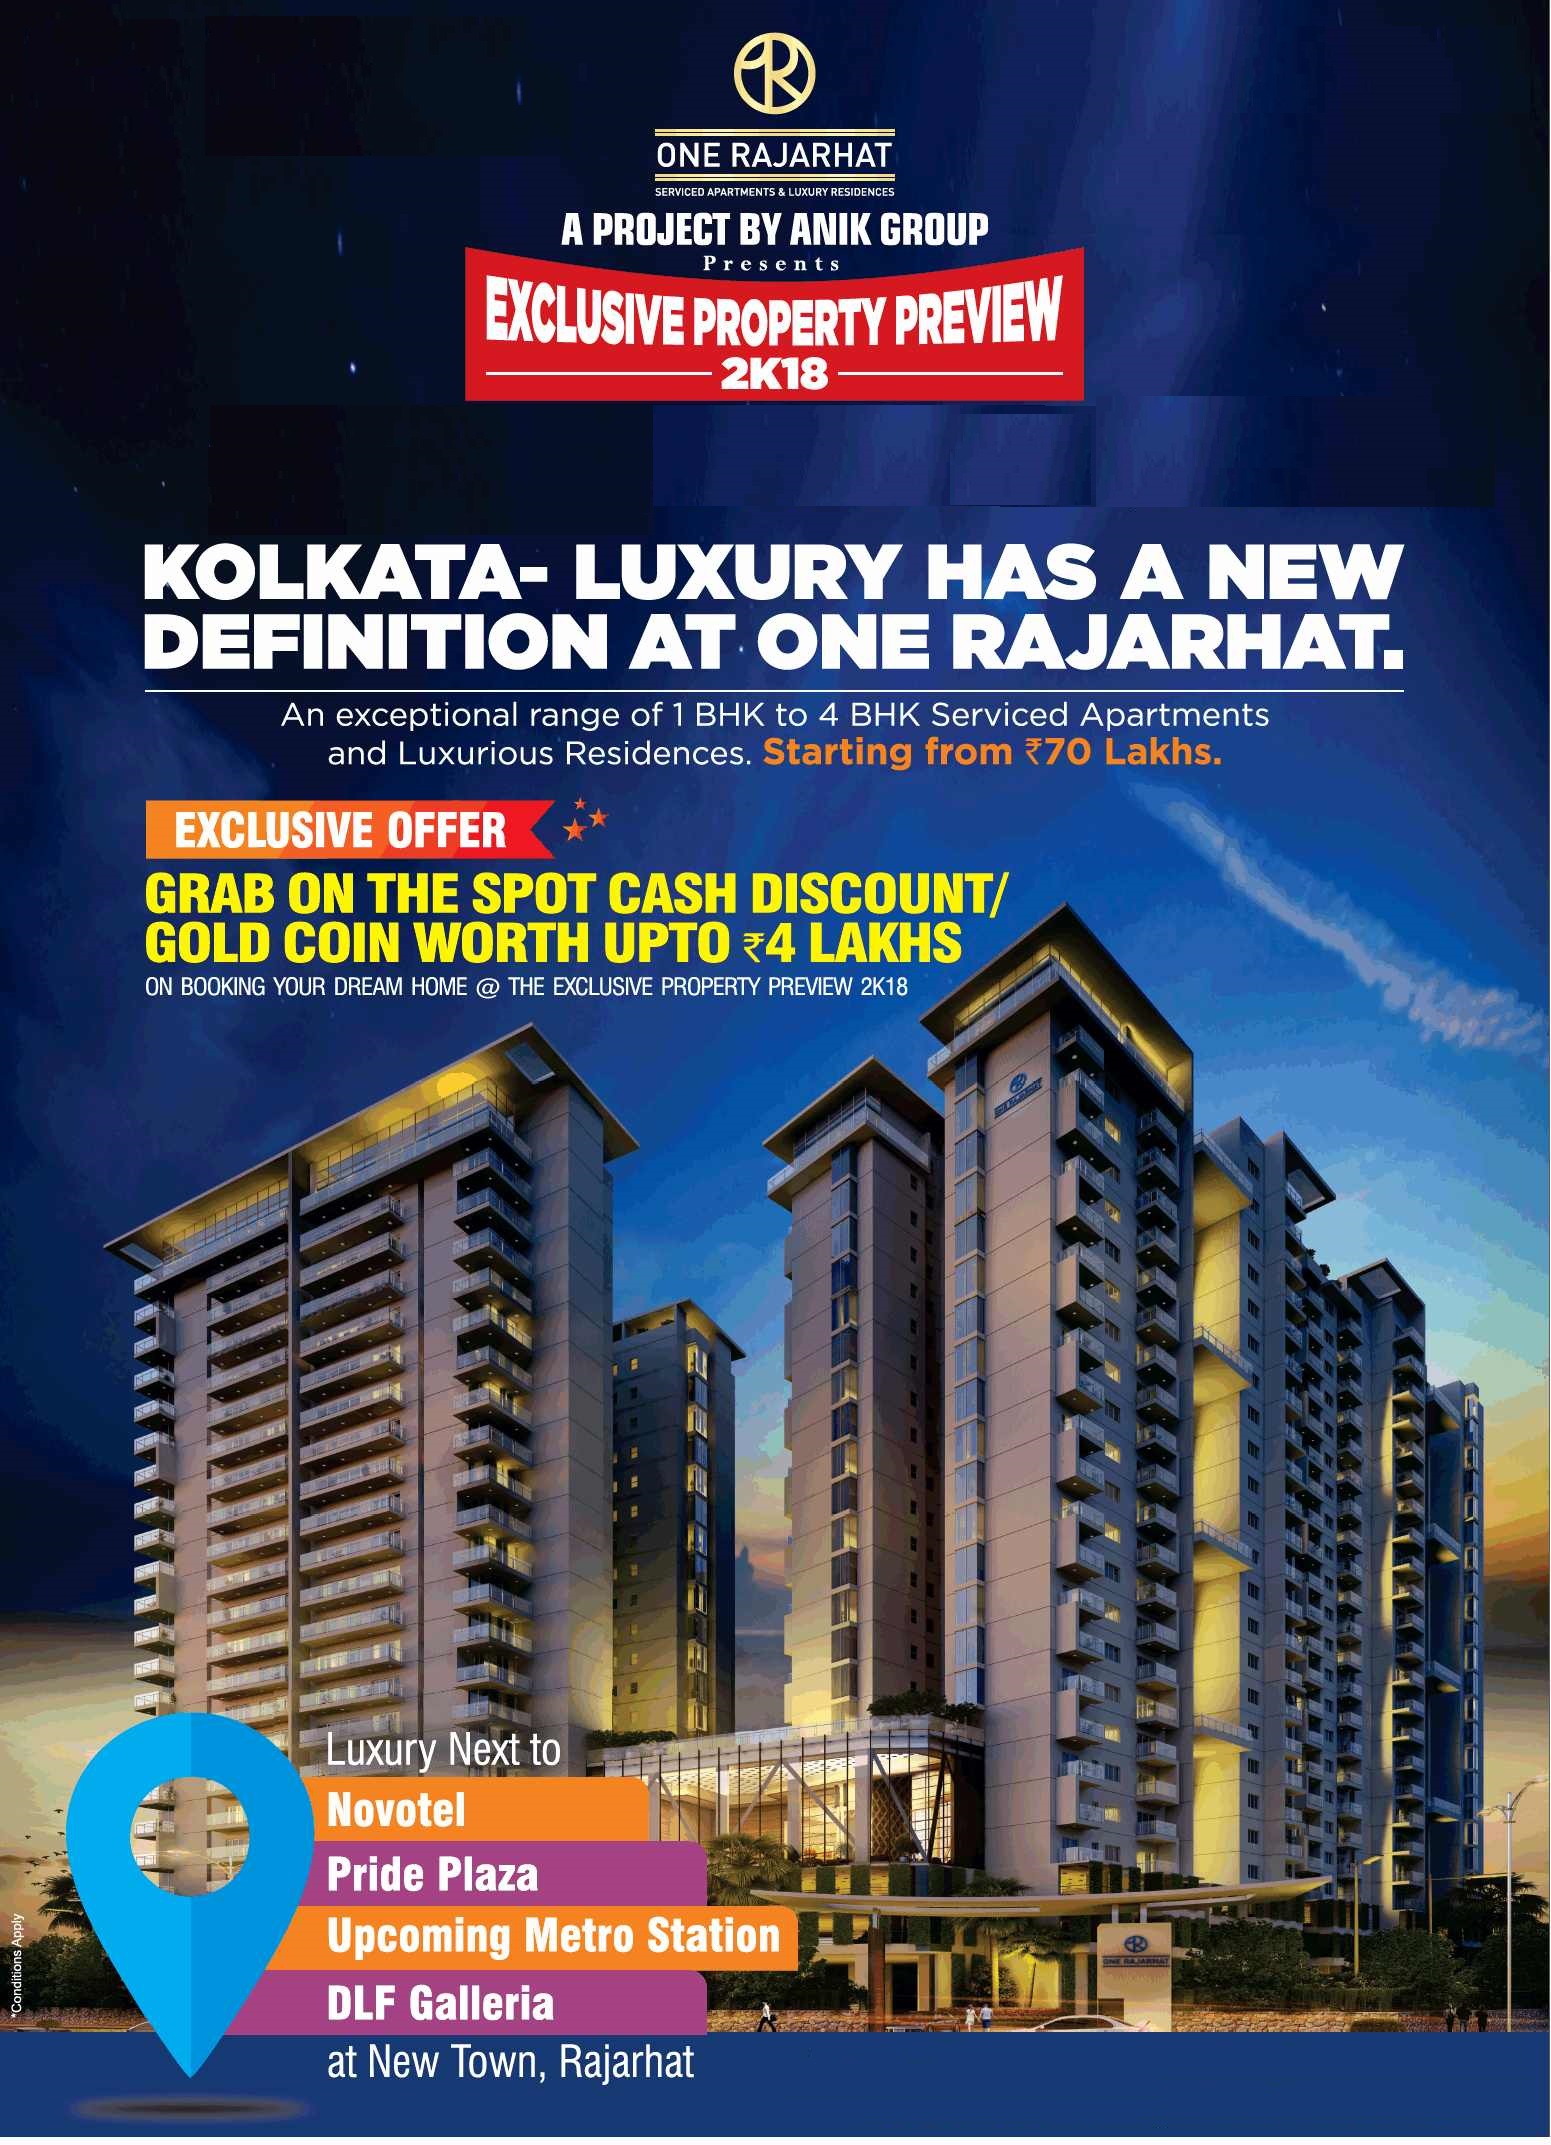 Grab on the spot cash discount/gold coin worth upto 4 lakhs at Ruchi One Rajarhat in Kolkata Update